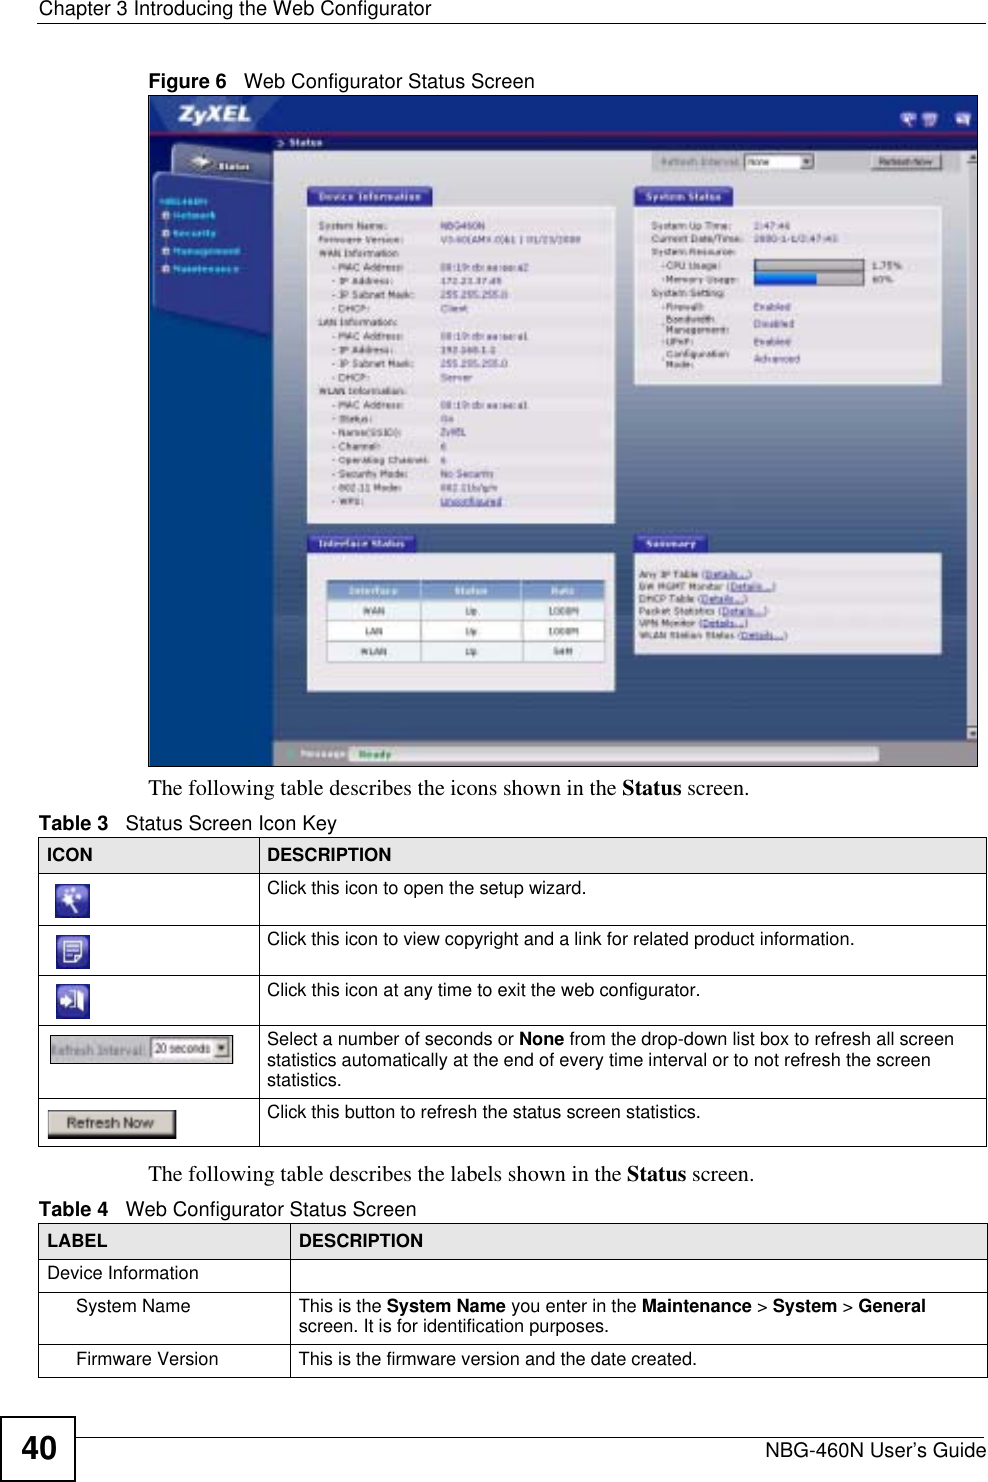 Chapter 3 Introducing the Web ConfiguratorNBG-460N User’s Guide40Figure 6   Web Configurator Status Screen The following table describes the icons shown in the Status screen.The following table describes the labels shown in the Status screen.Table 3   Status Screen Icon Key ICON DESCRIPTIONClick this icon to open the setup wizard. Click this icon to view copyright and a link for related product information.Click this icon at any time to exit the web configurator.Select a number of seconds or None from the drop-down list box to refresh all screen statistics automatically at the end of every time interval or to not refresh the screen statistics.Click this button to refresh the status screen statistics.Table 4   Web Configurator Status Screen   LABEL DESCRIPTIONDevice InformationSystem Name This is the System Name you enter in the Maintenance &gt; System &gt; Generalscreen. It is for identification purposes.Firmware Version This is the firmware version and the date created. 